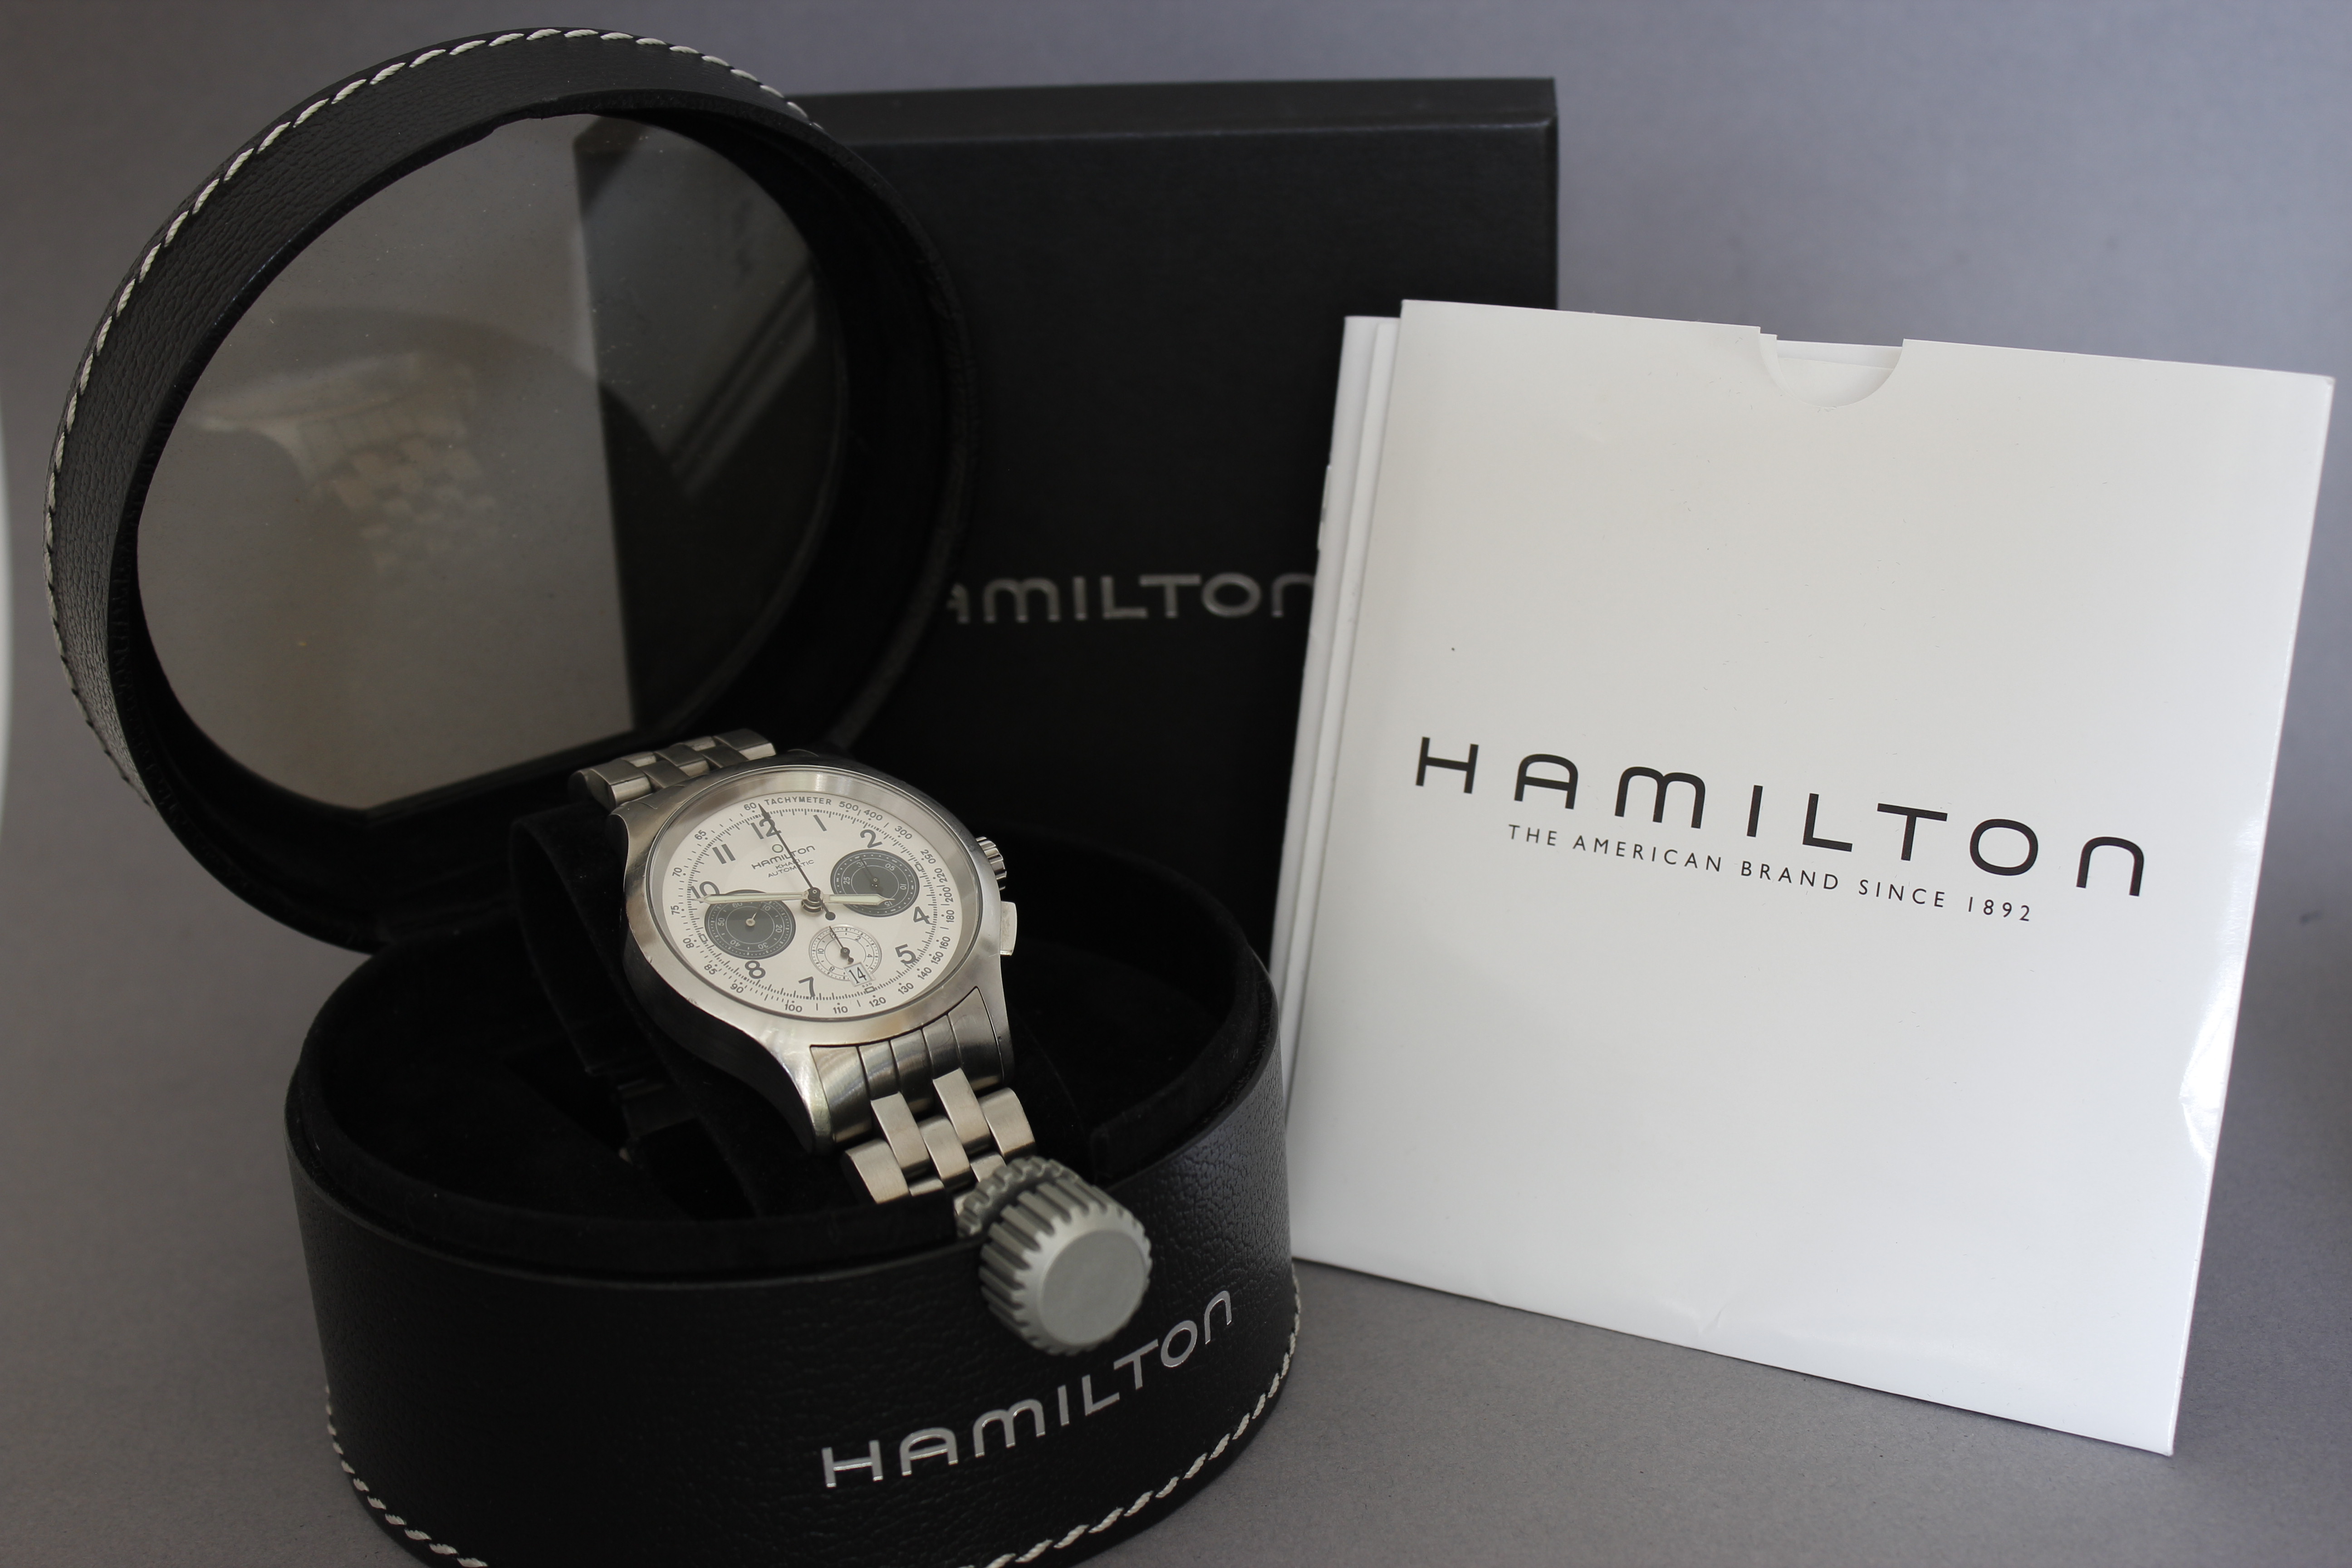 Hamilton Khaki Aviation Chronograph Automatic with Box and Papers - Image 3 of 4